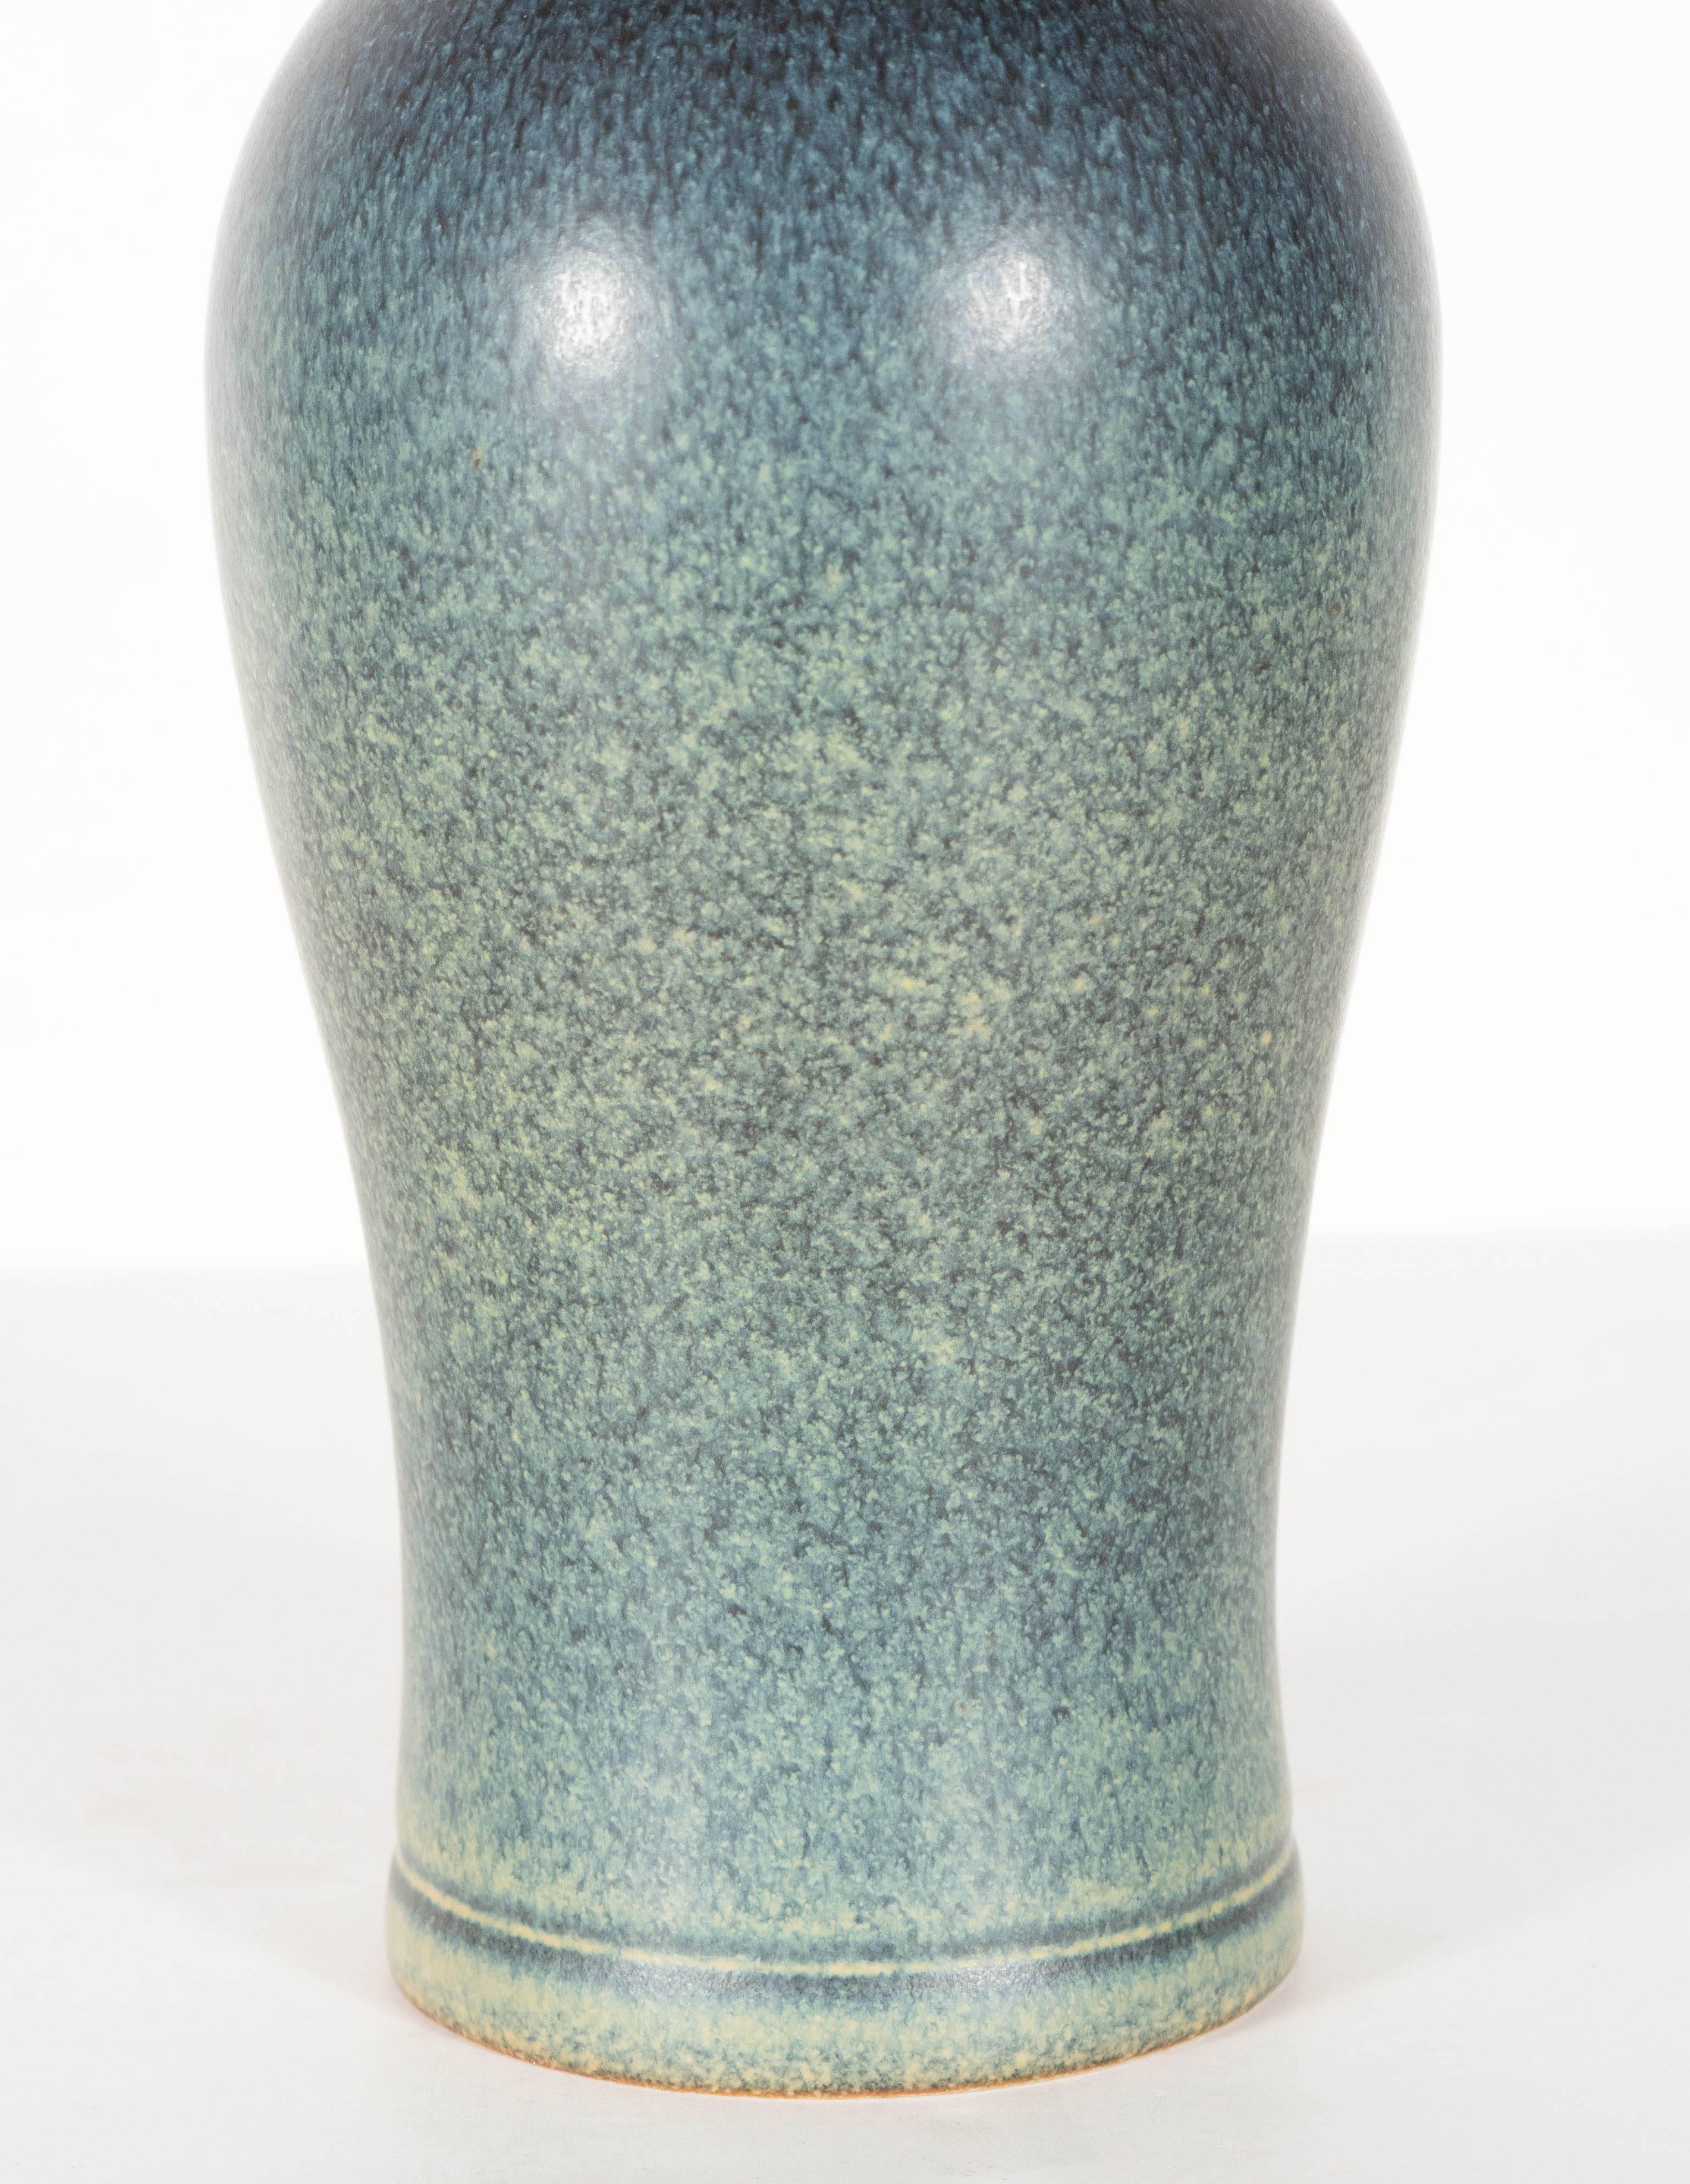 A gorgeous Mid-Century Modernist vase in hues of green and blue by Swedish ceramicist Gunnar Nylund for Rörstrand. A lovely piece on its own or folding a single stem of flora. This piece is in excellent condition.